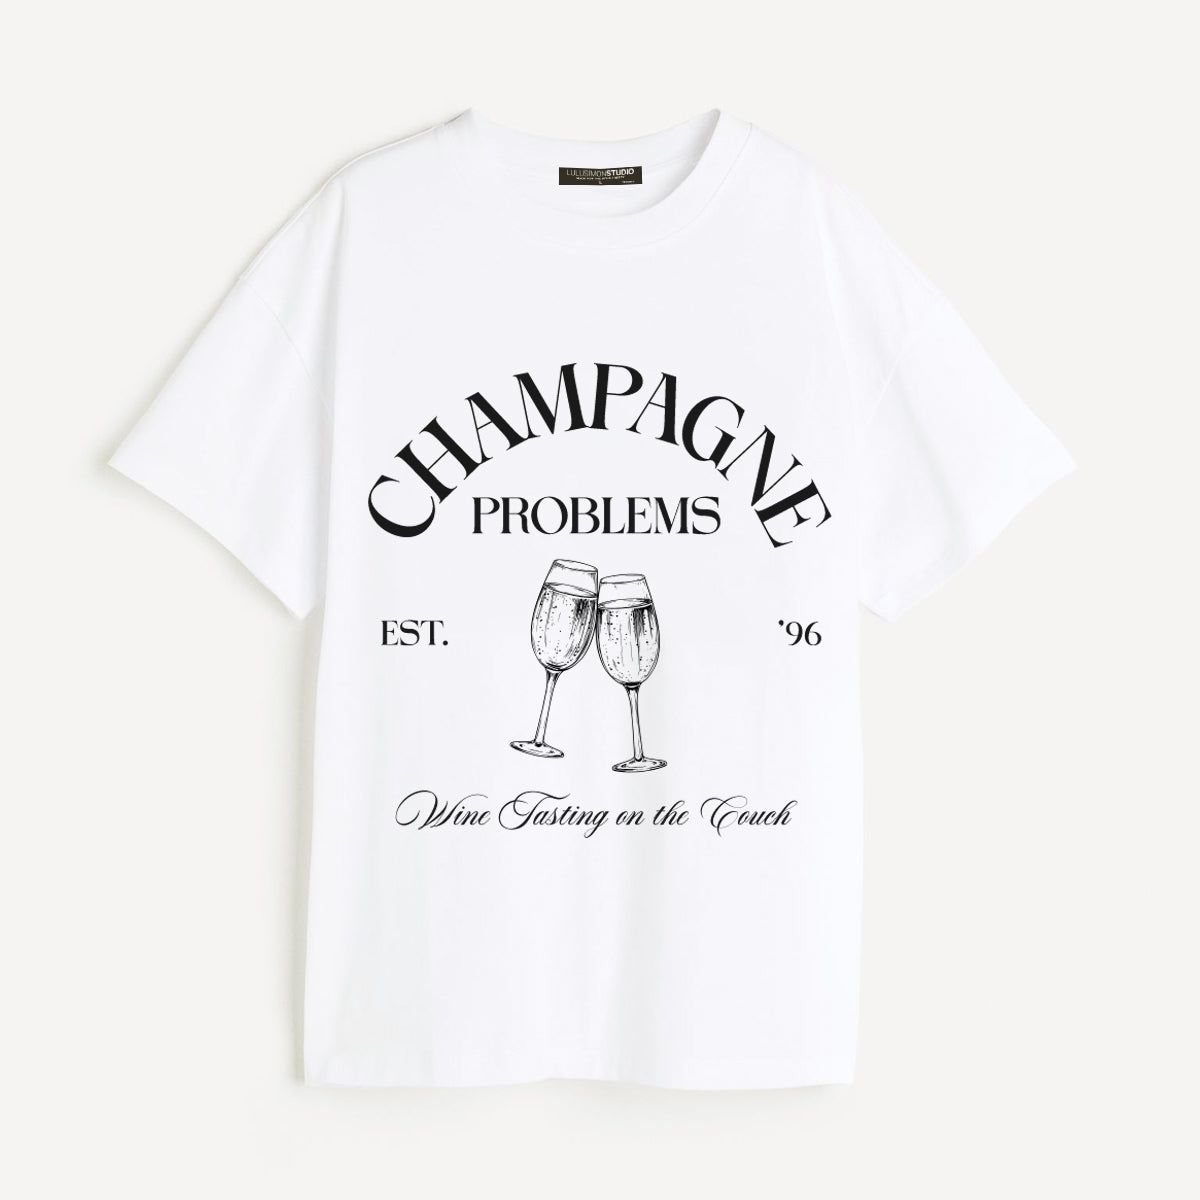 Champagne Problems Pigment Dye Tee